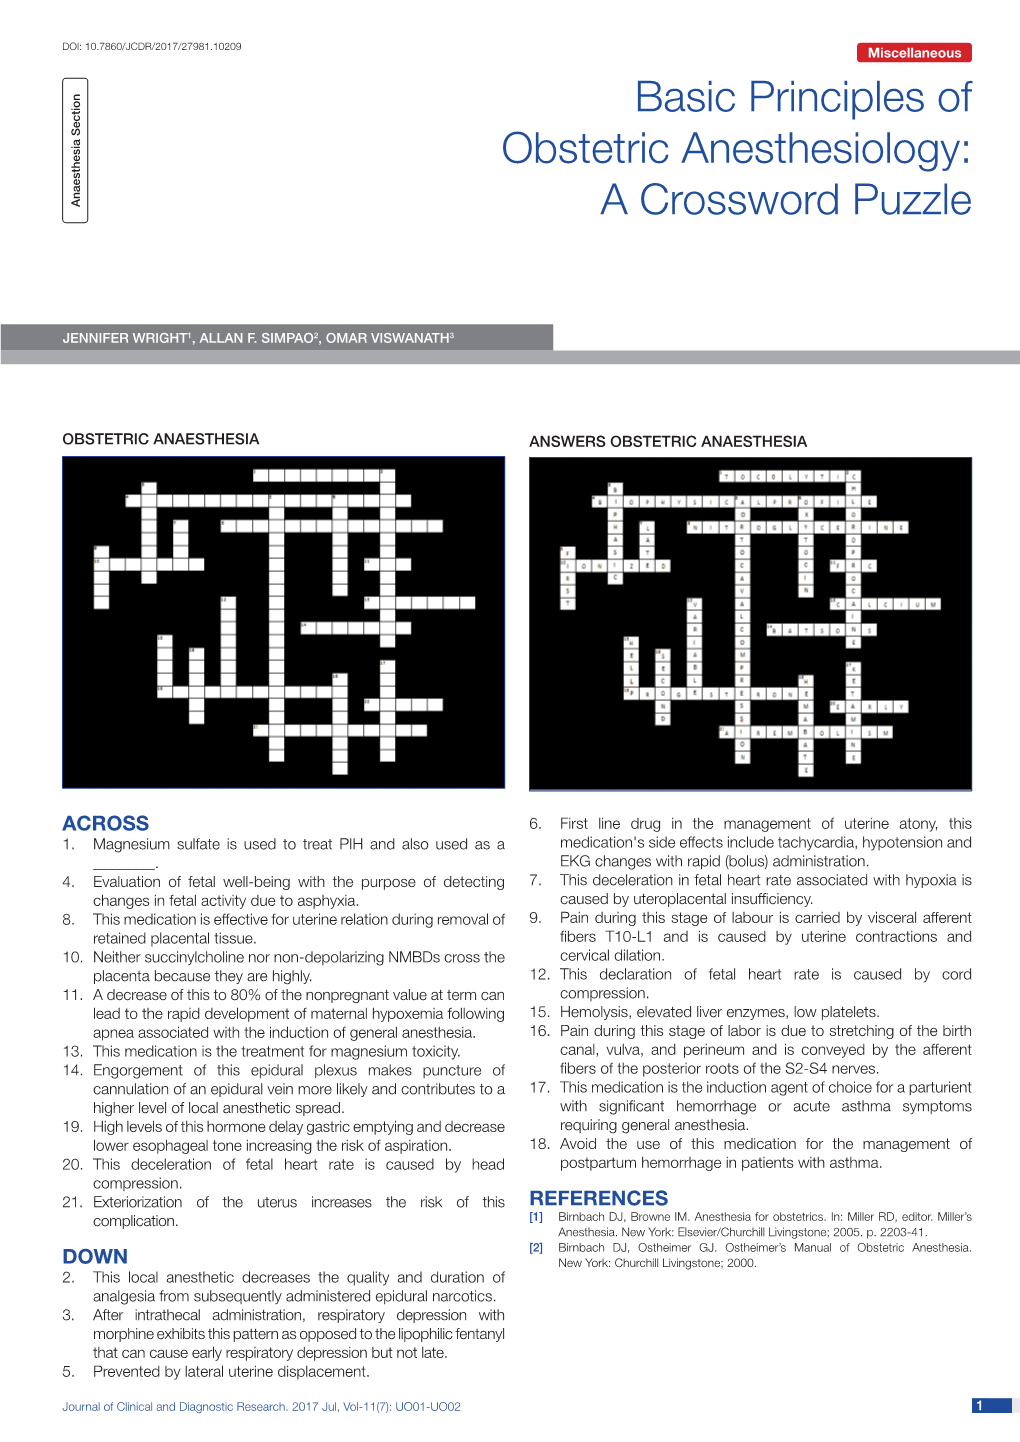 Basic Principles of Obstetric Anesthesiology: a Crossword Puzzle